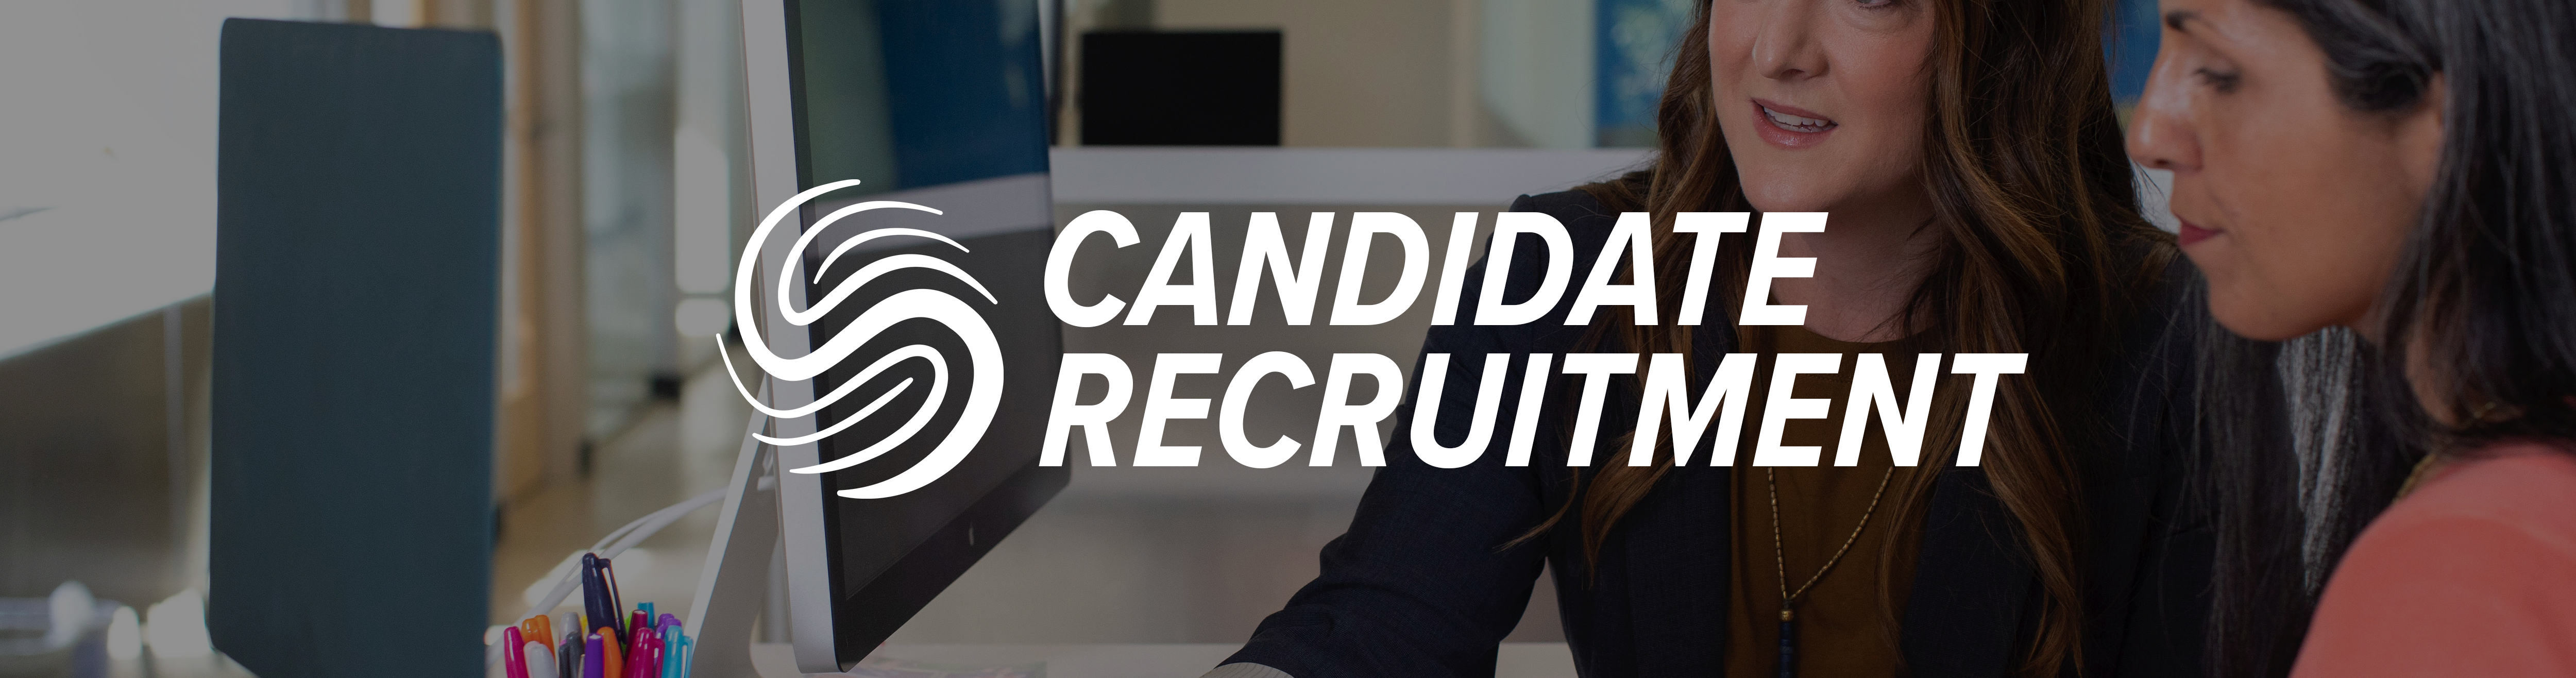 Candidate Recruiting in Portland, OR - Specialized Recruiting Group